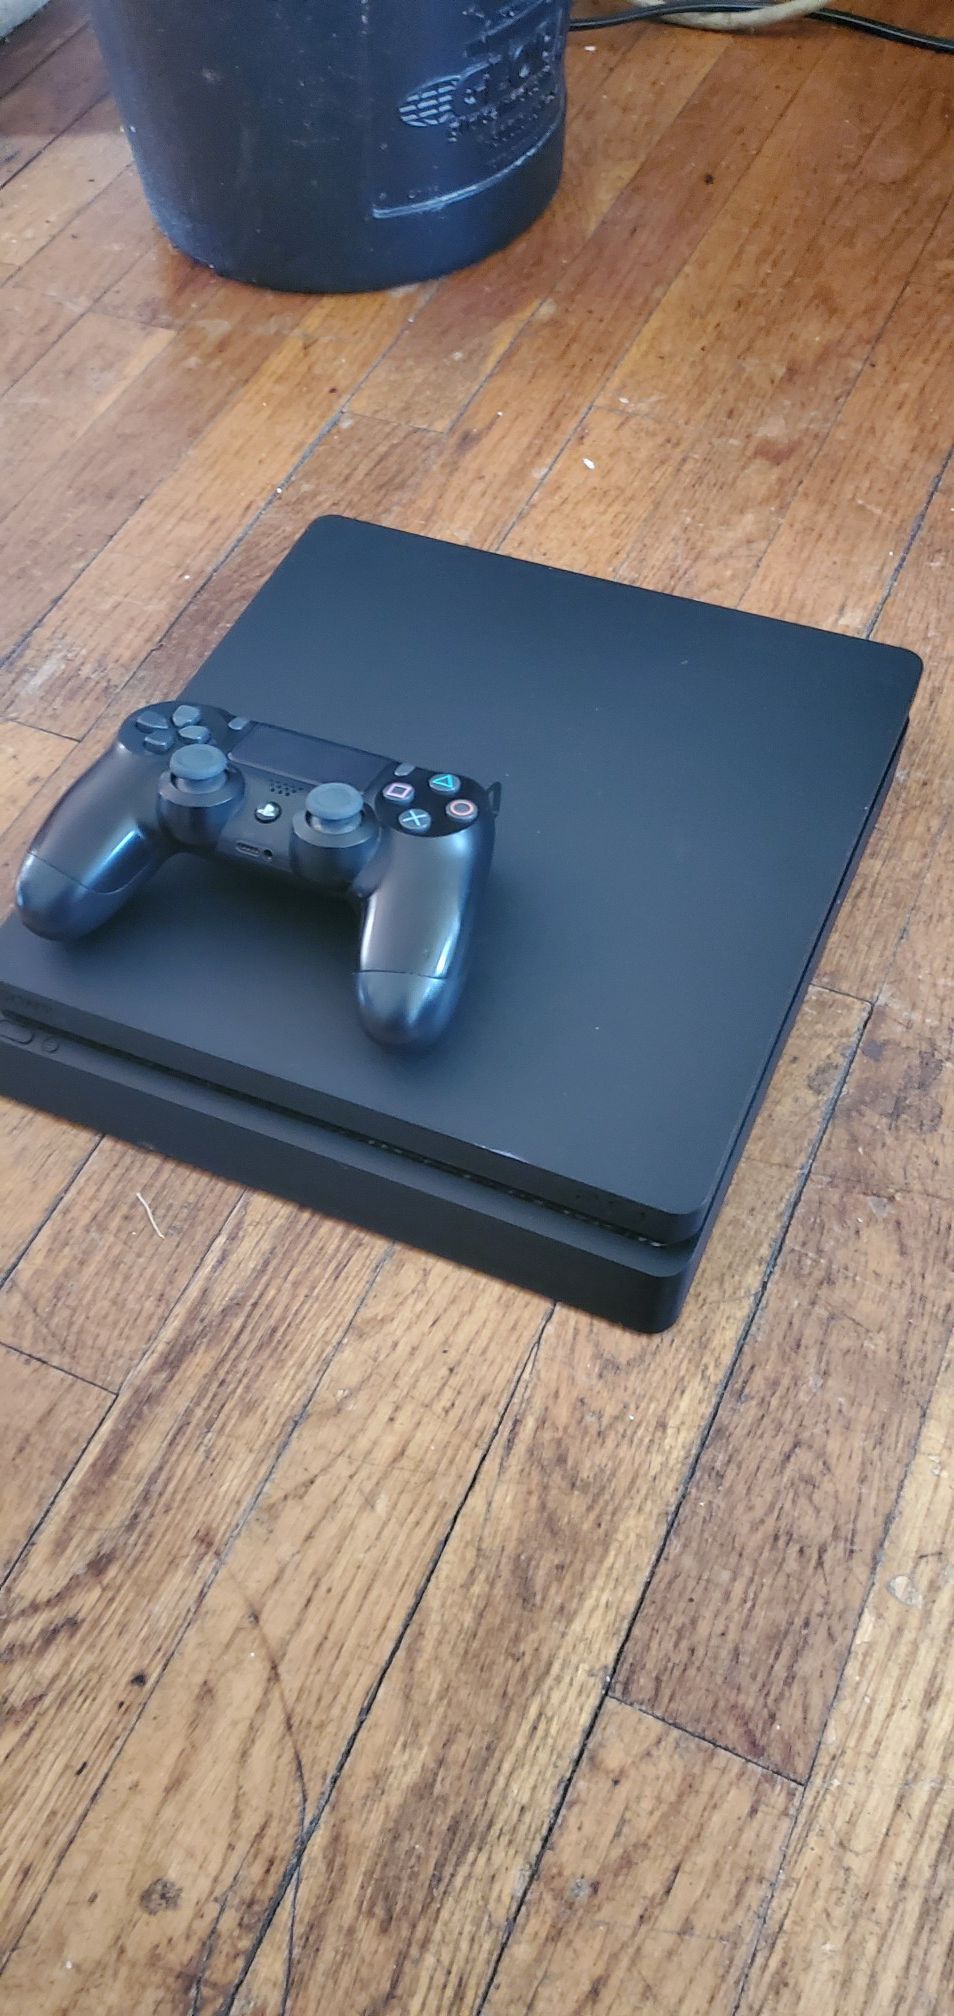 PS4 SLIM WITH EXTRA CAMO CONTROLLER N 2K 20 SOLD SEPARATELY